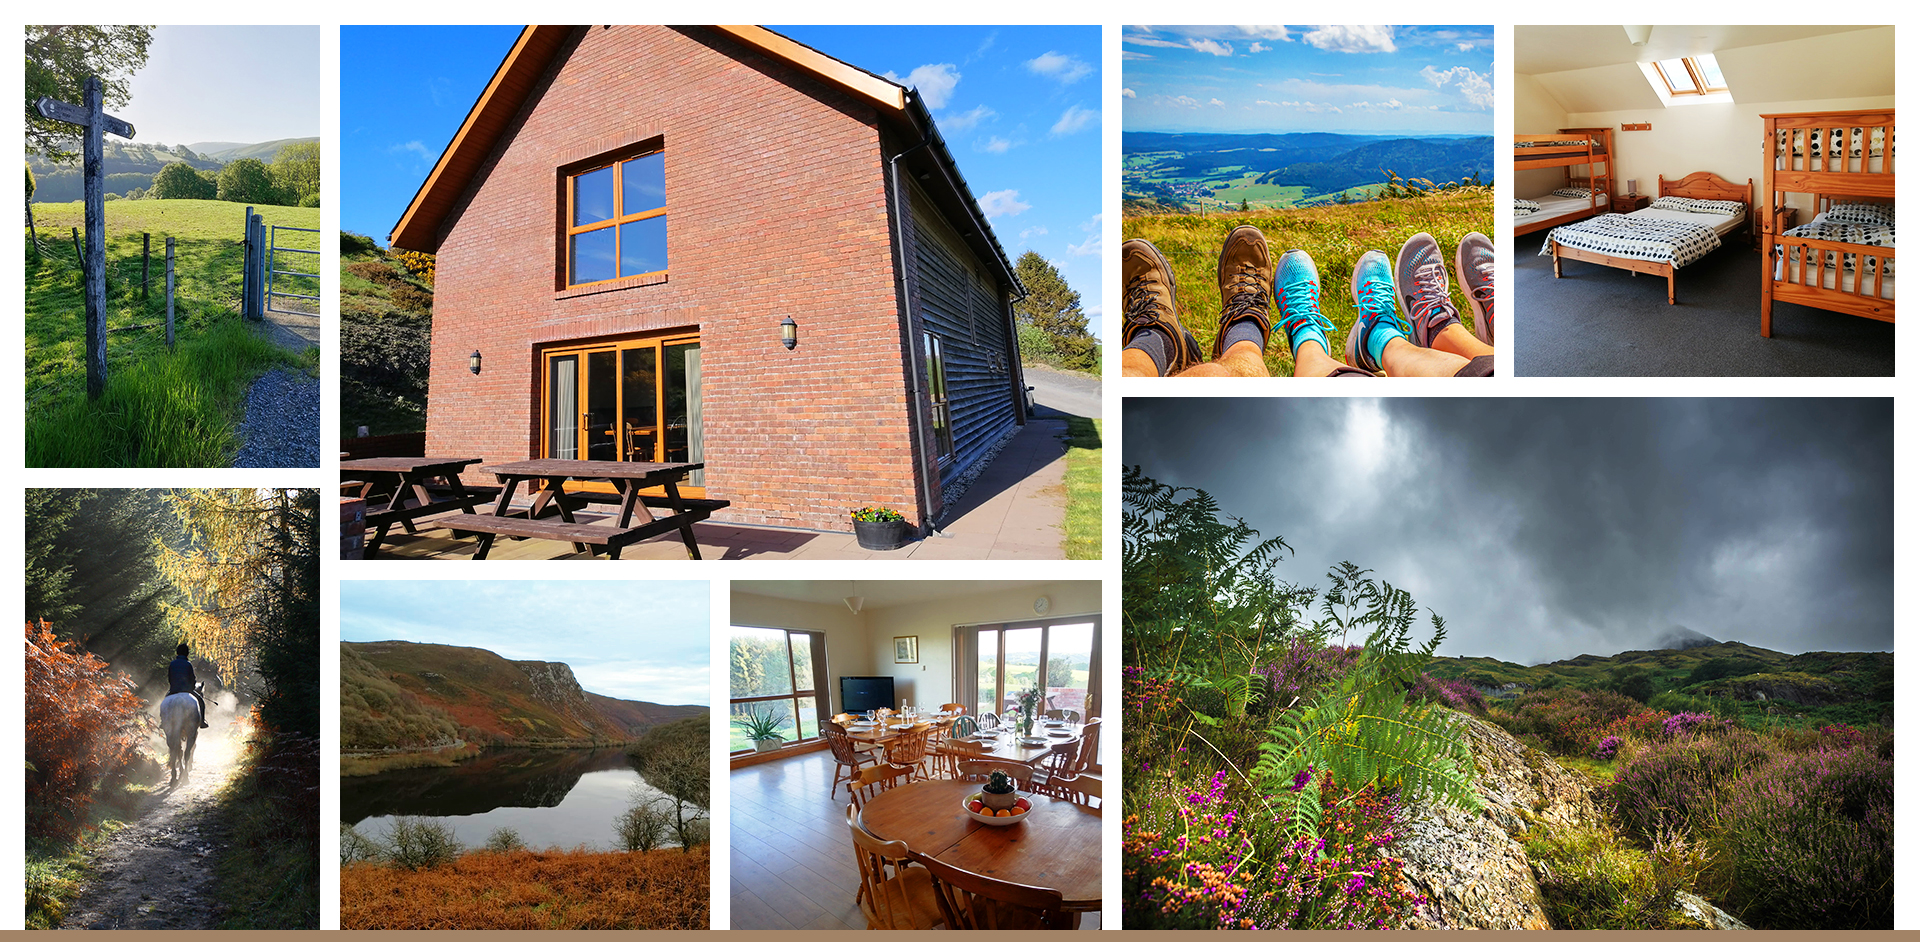 Plasnewydd Bunkhouse, large group accommodation set in rural mid Wales